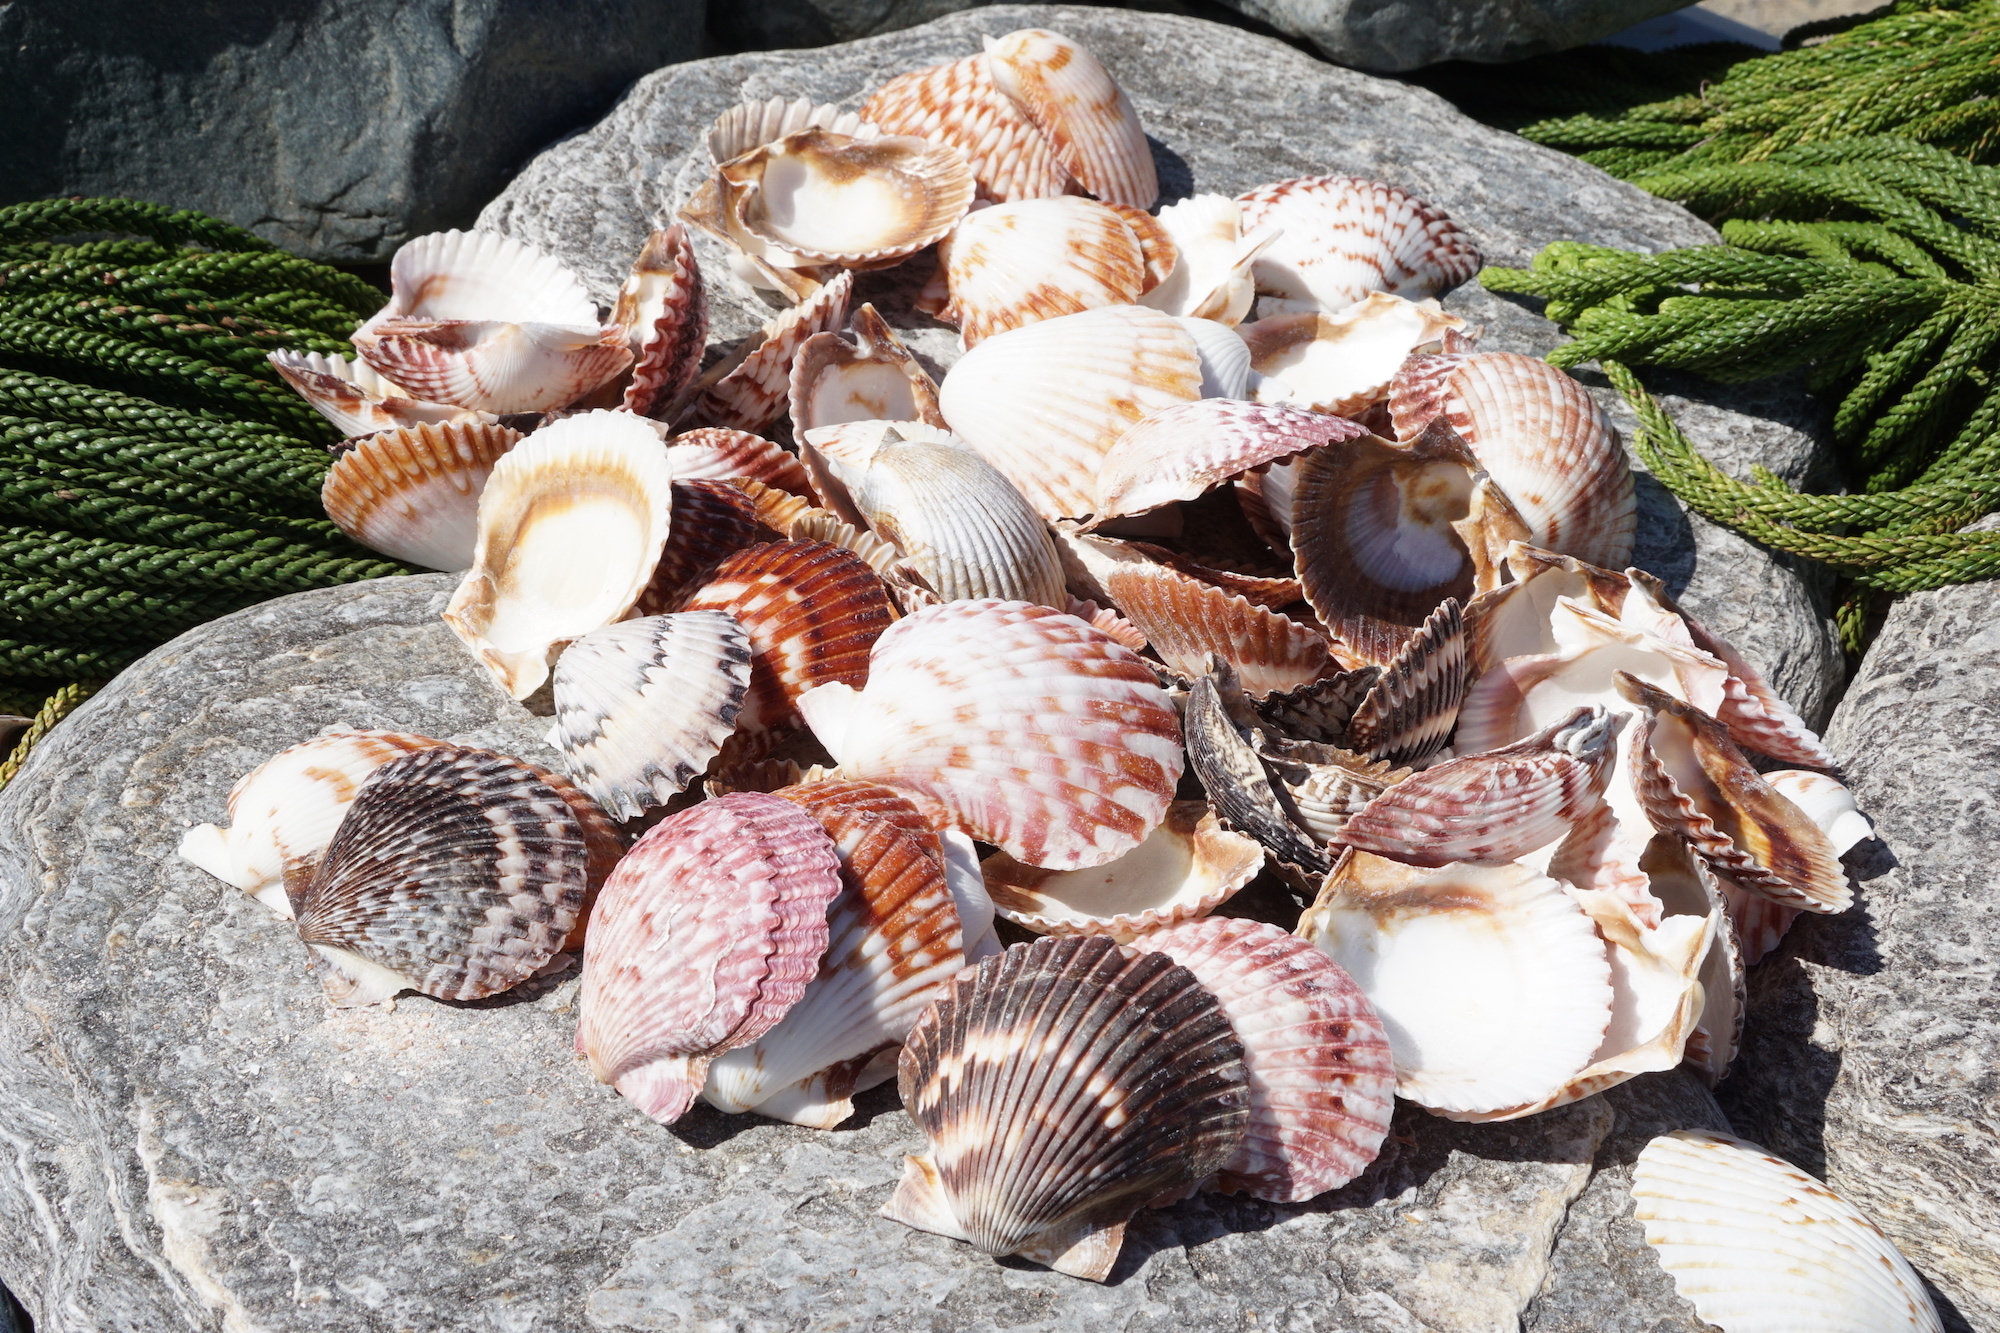 Calico Scallop 1kg, 500g, 250g - Buy Shells Online - Shell Paradise